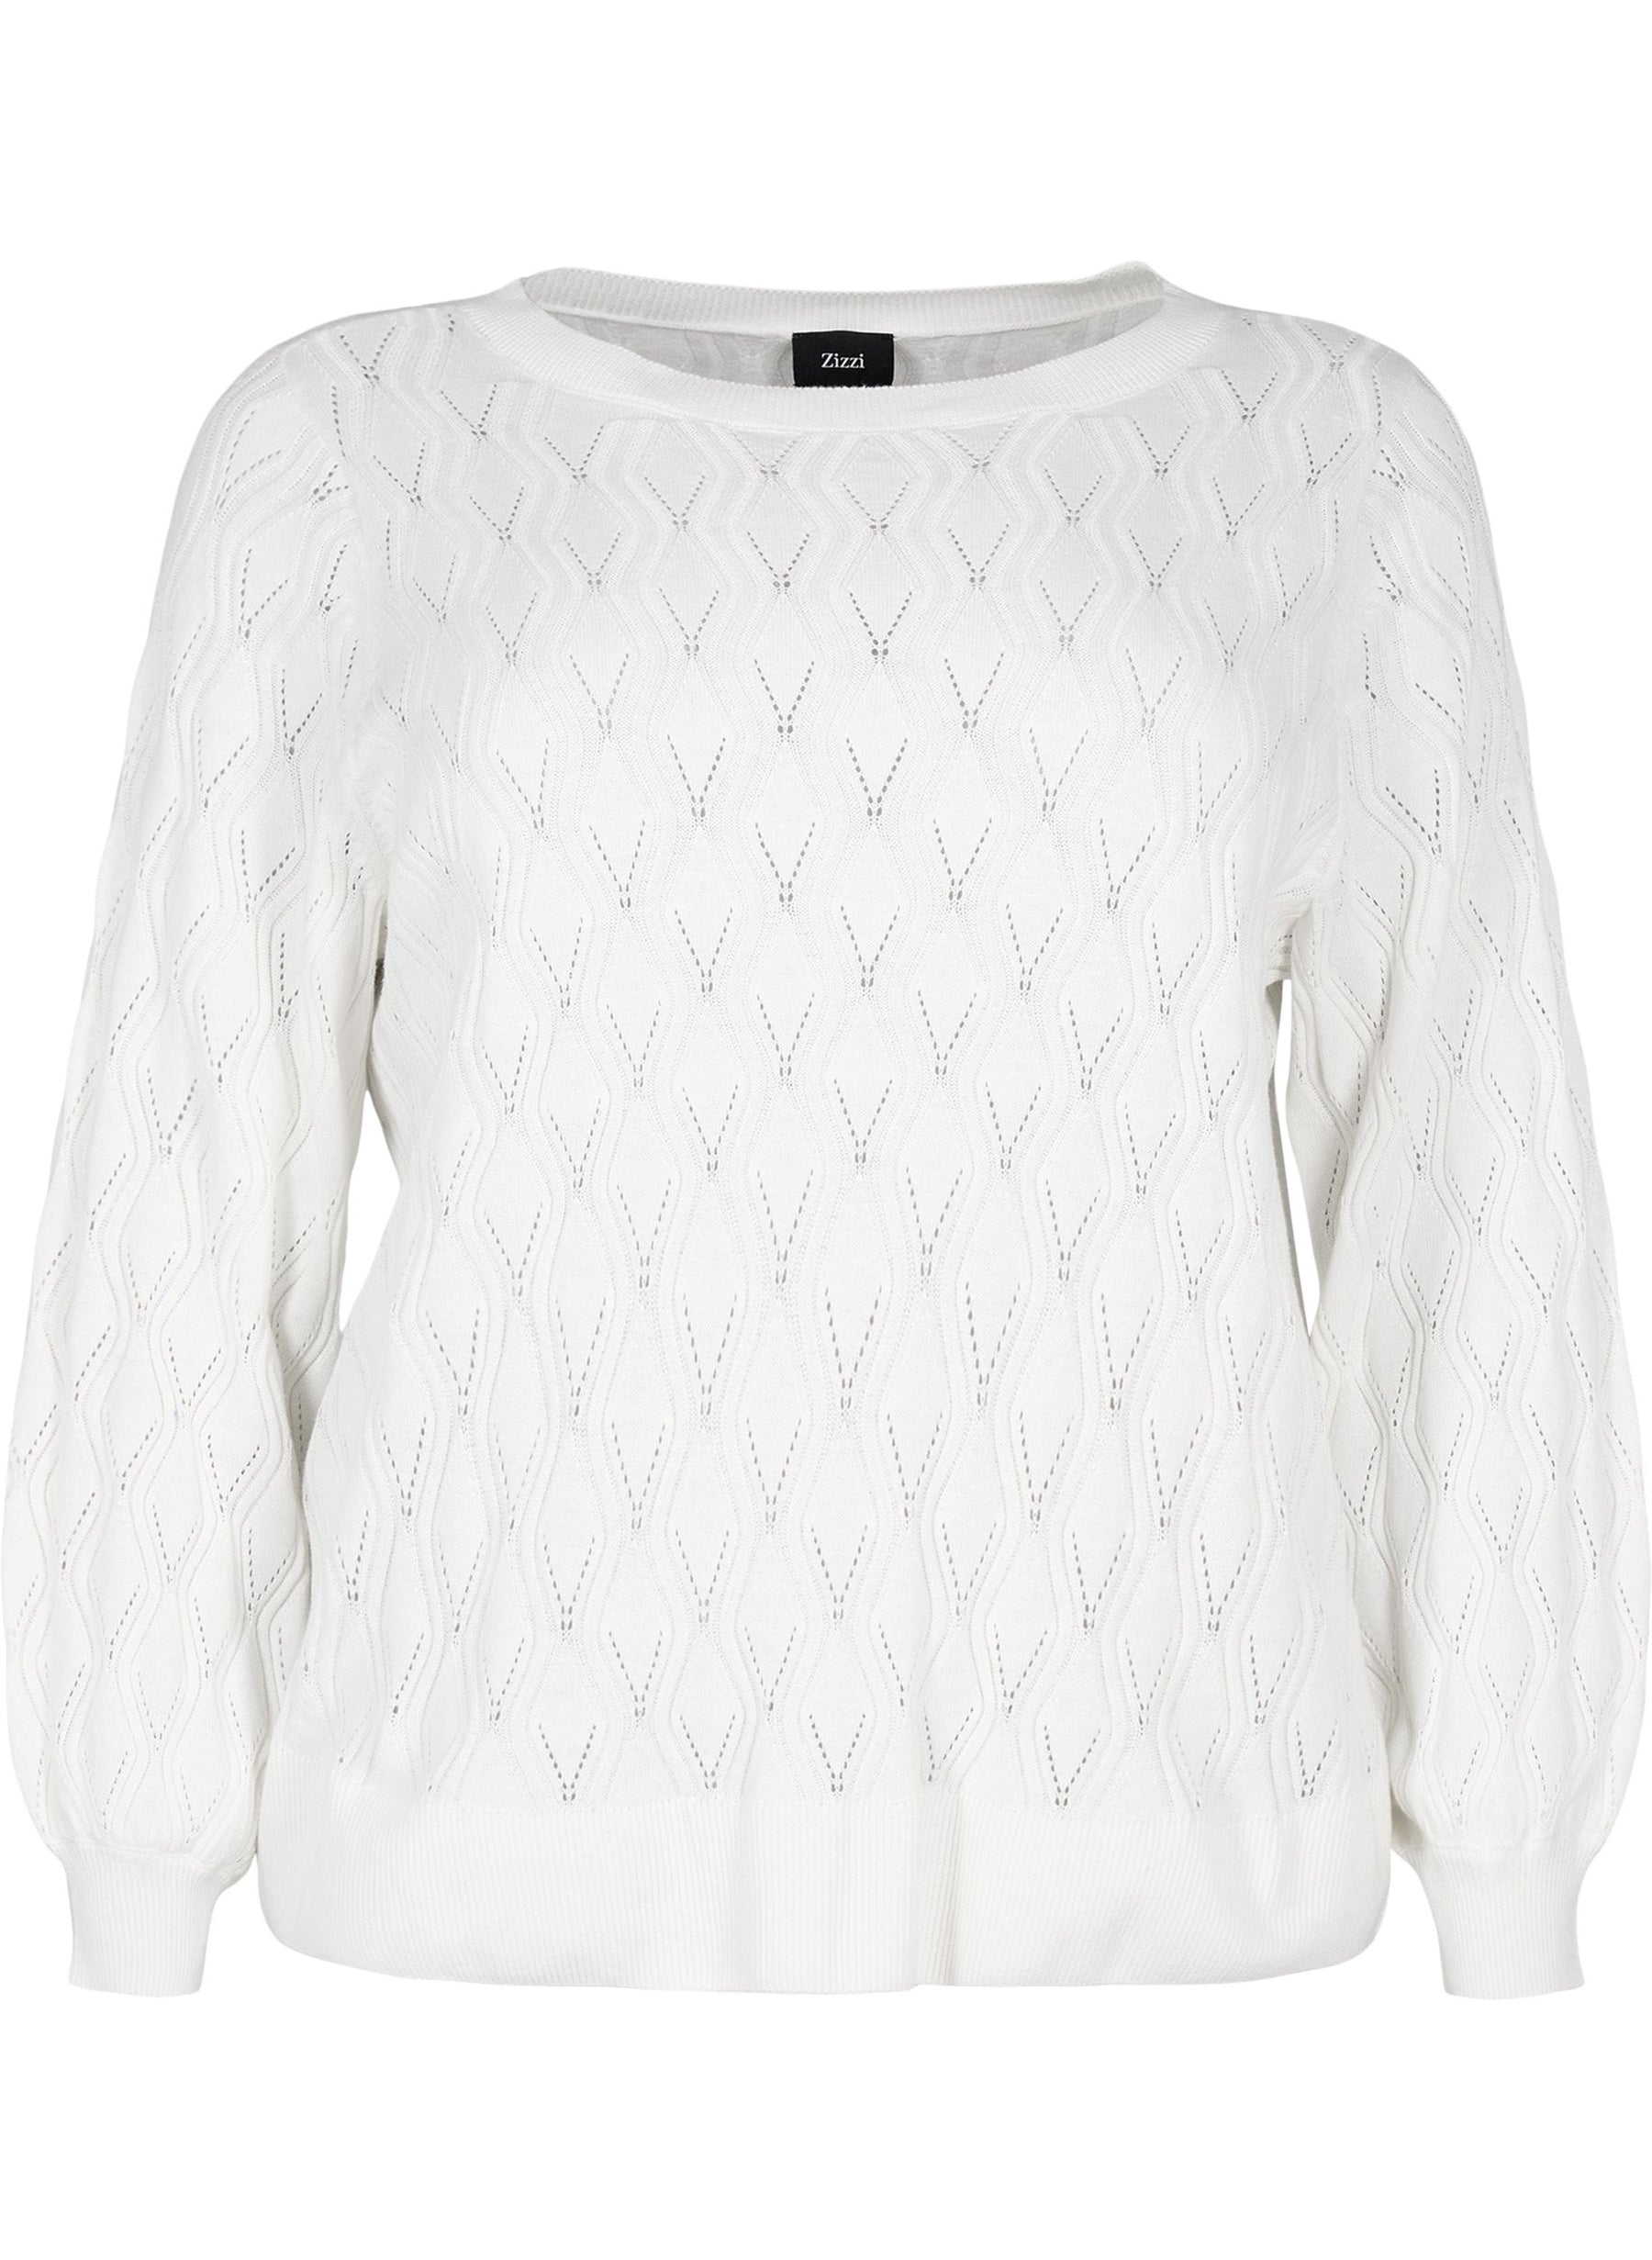 Zizzi Knitted Pullover in White | Plus Size Clothing